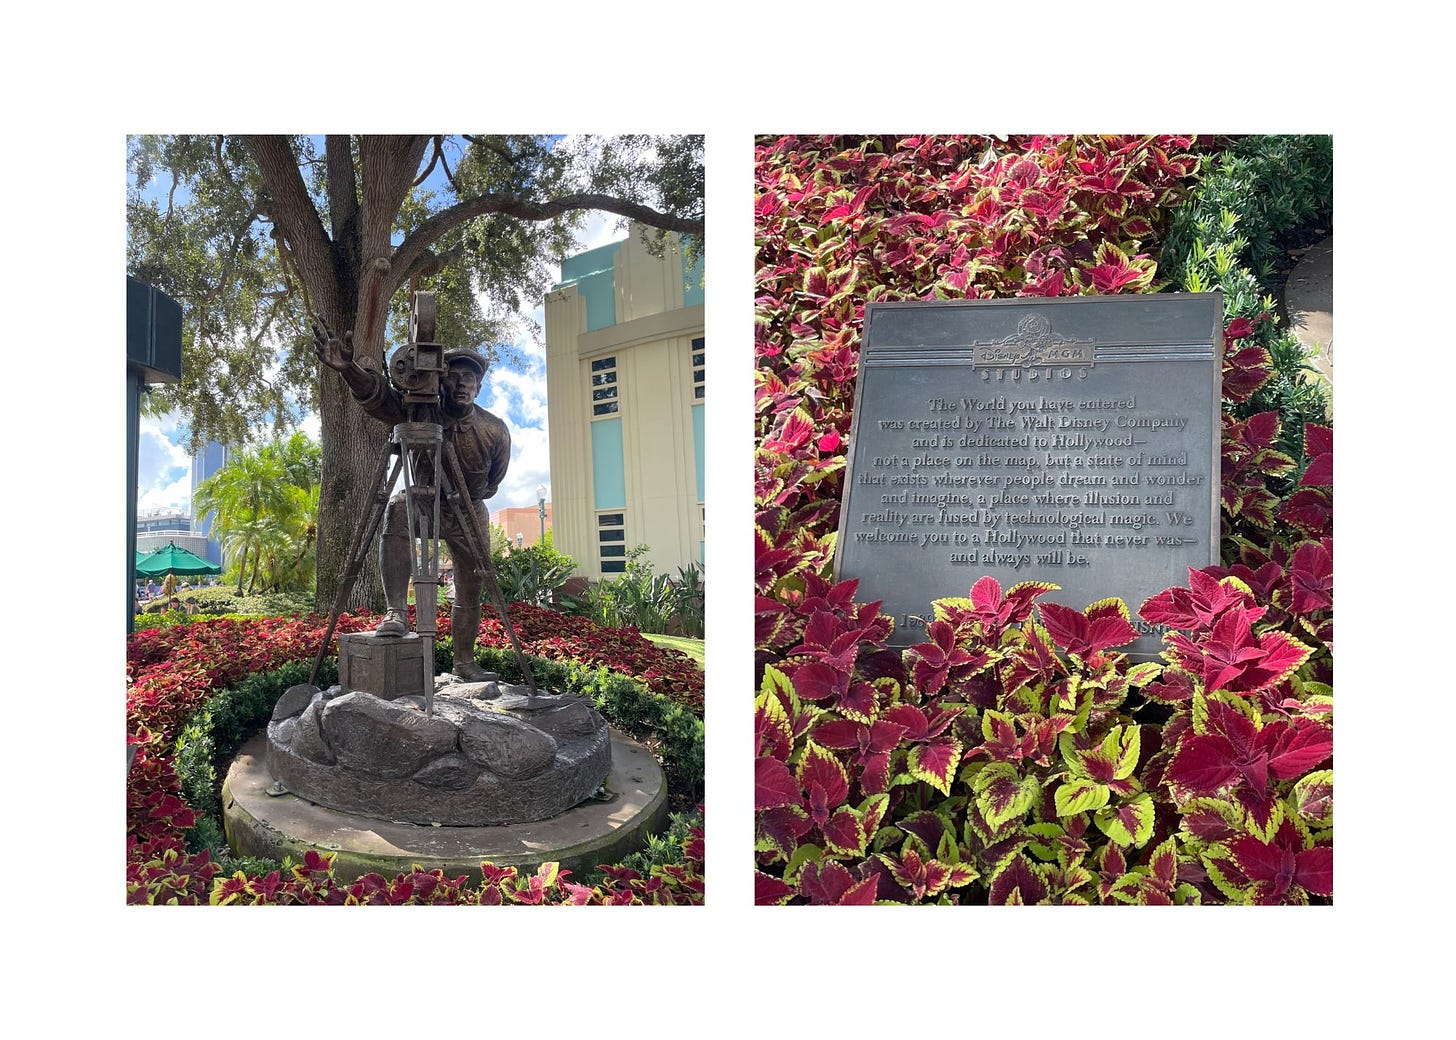 A side by side image of a filmmaker statue and a plaque from Disney's Hollywood Studios.